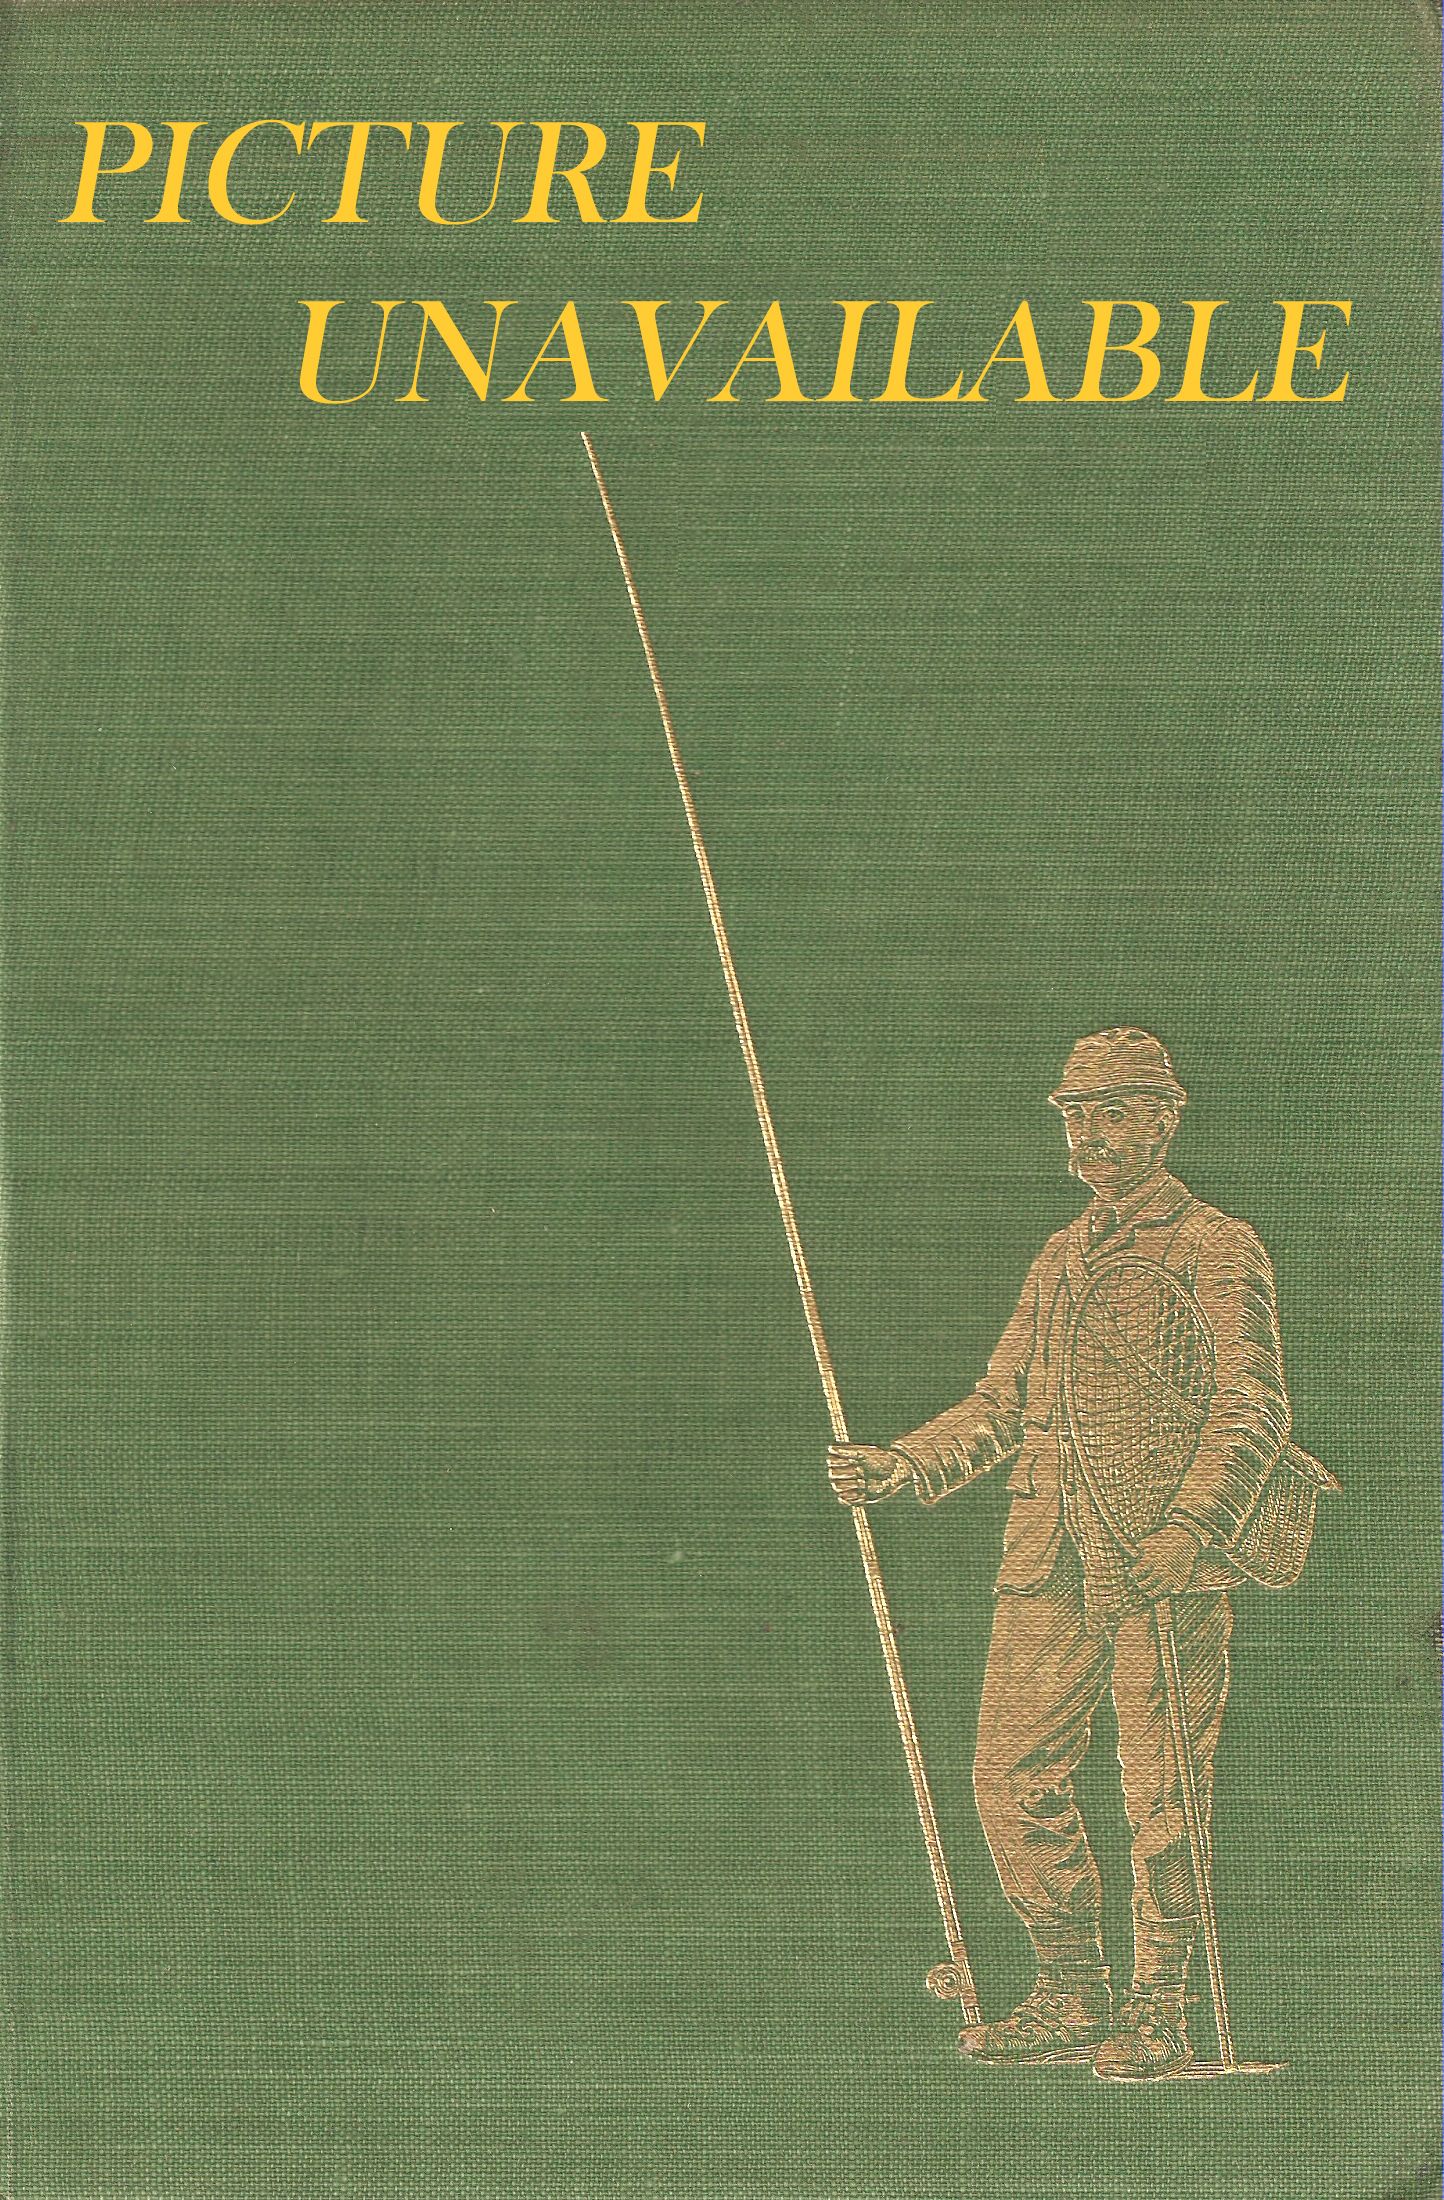 THE FALCONER: THE JOURNAL OF THE BRITISH FALCONERS' CLUB VOLUME VII No. 1.  1977.